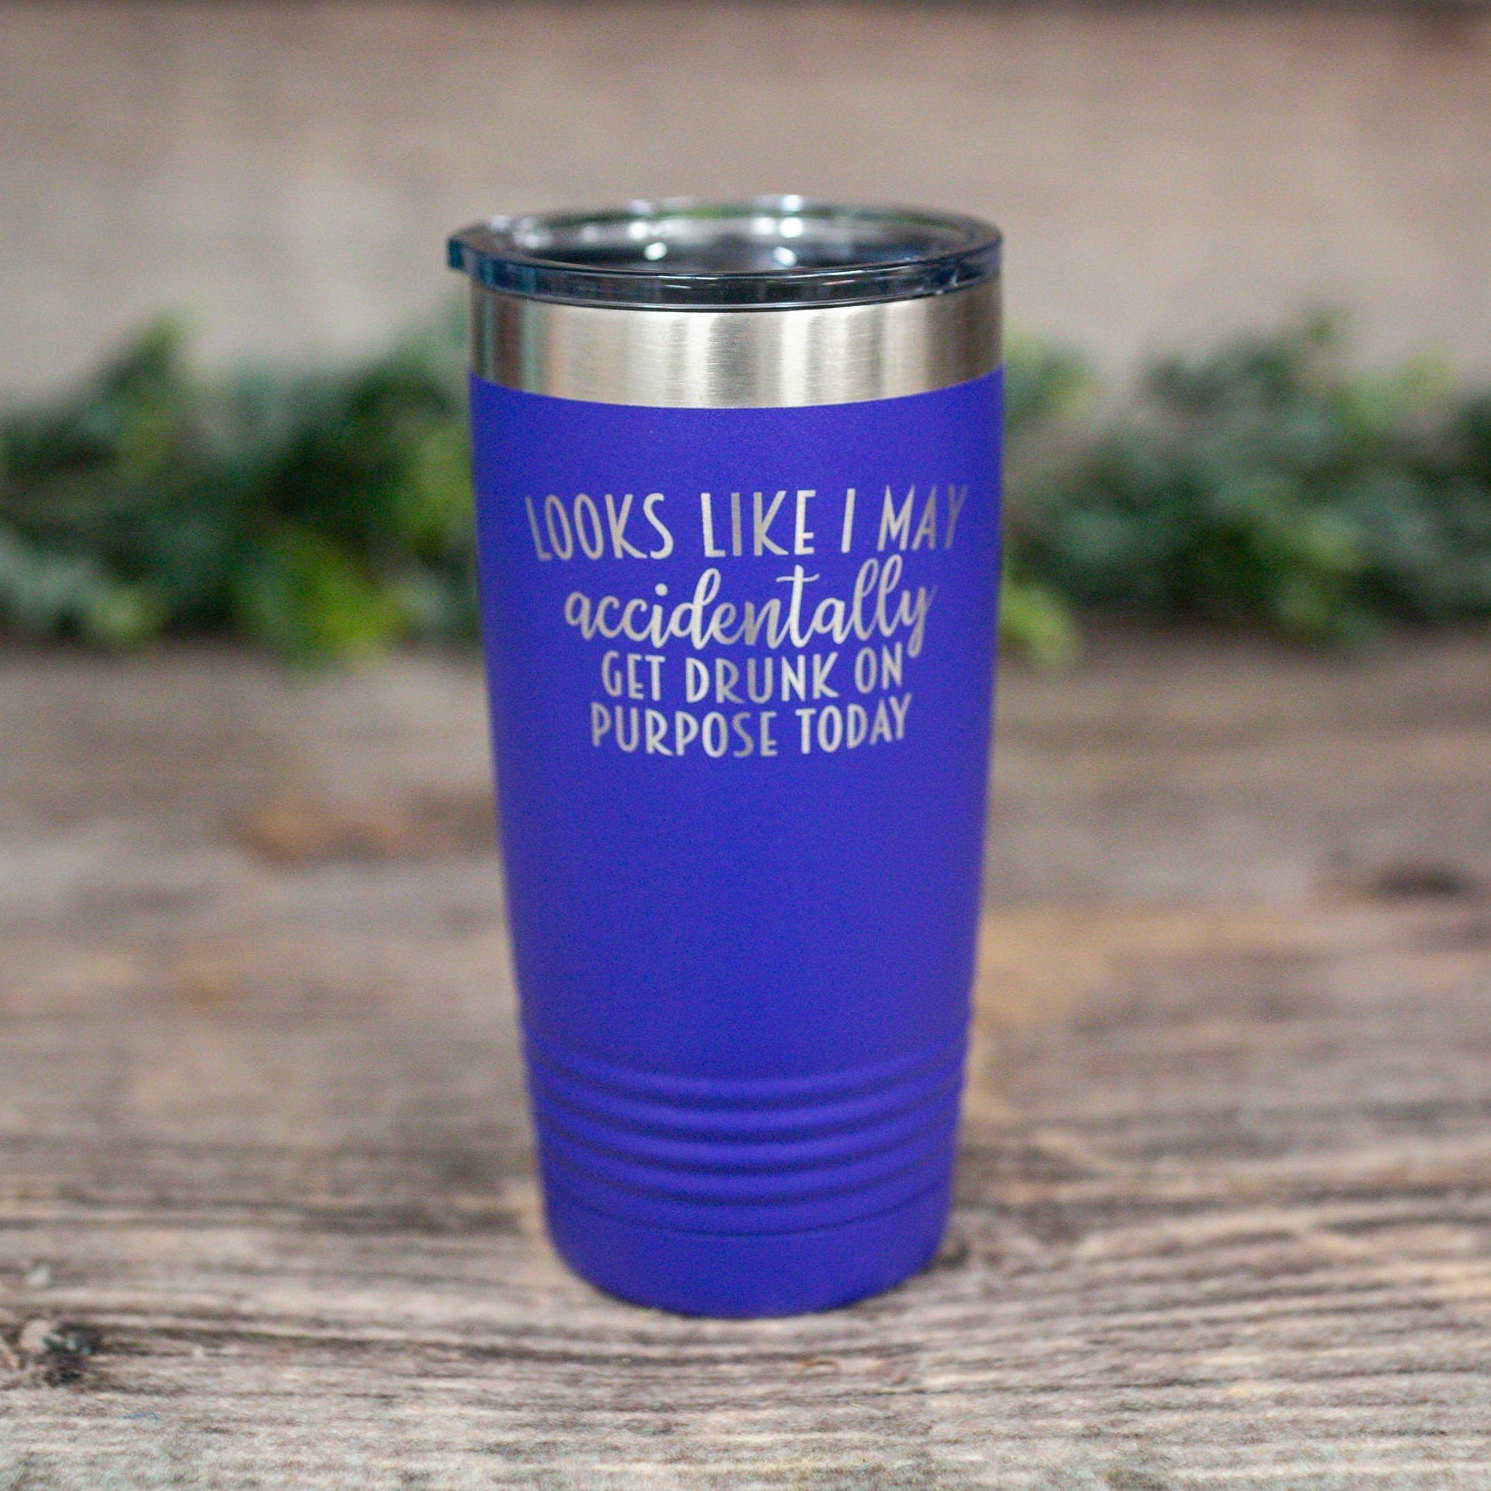 https://3cetching.com/wp-content/uploads/2021/07/looks-like-i-may-accidentally-get-drunk-on-purpose-today-engraved-stainless-tumbler-alcohol-gift-funny-drinking-tumbler-60f77d4a.jpg